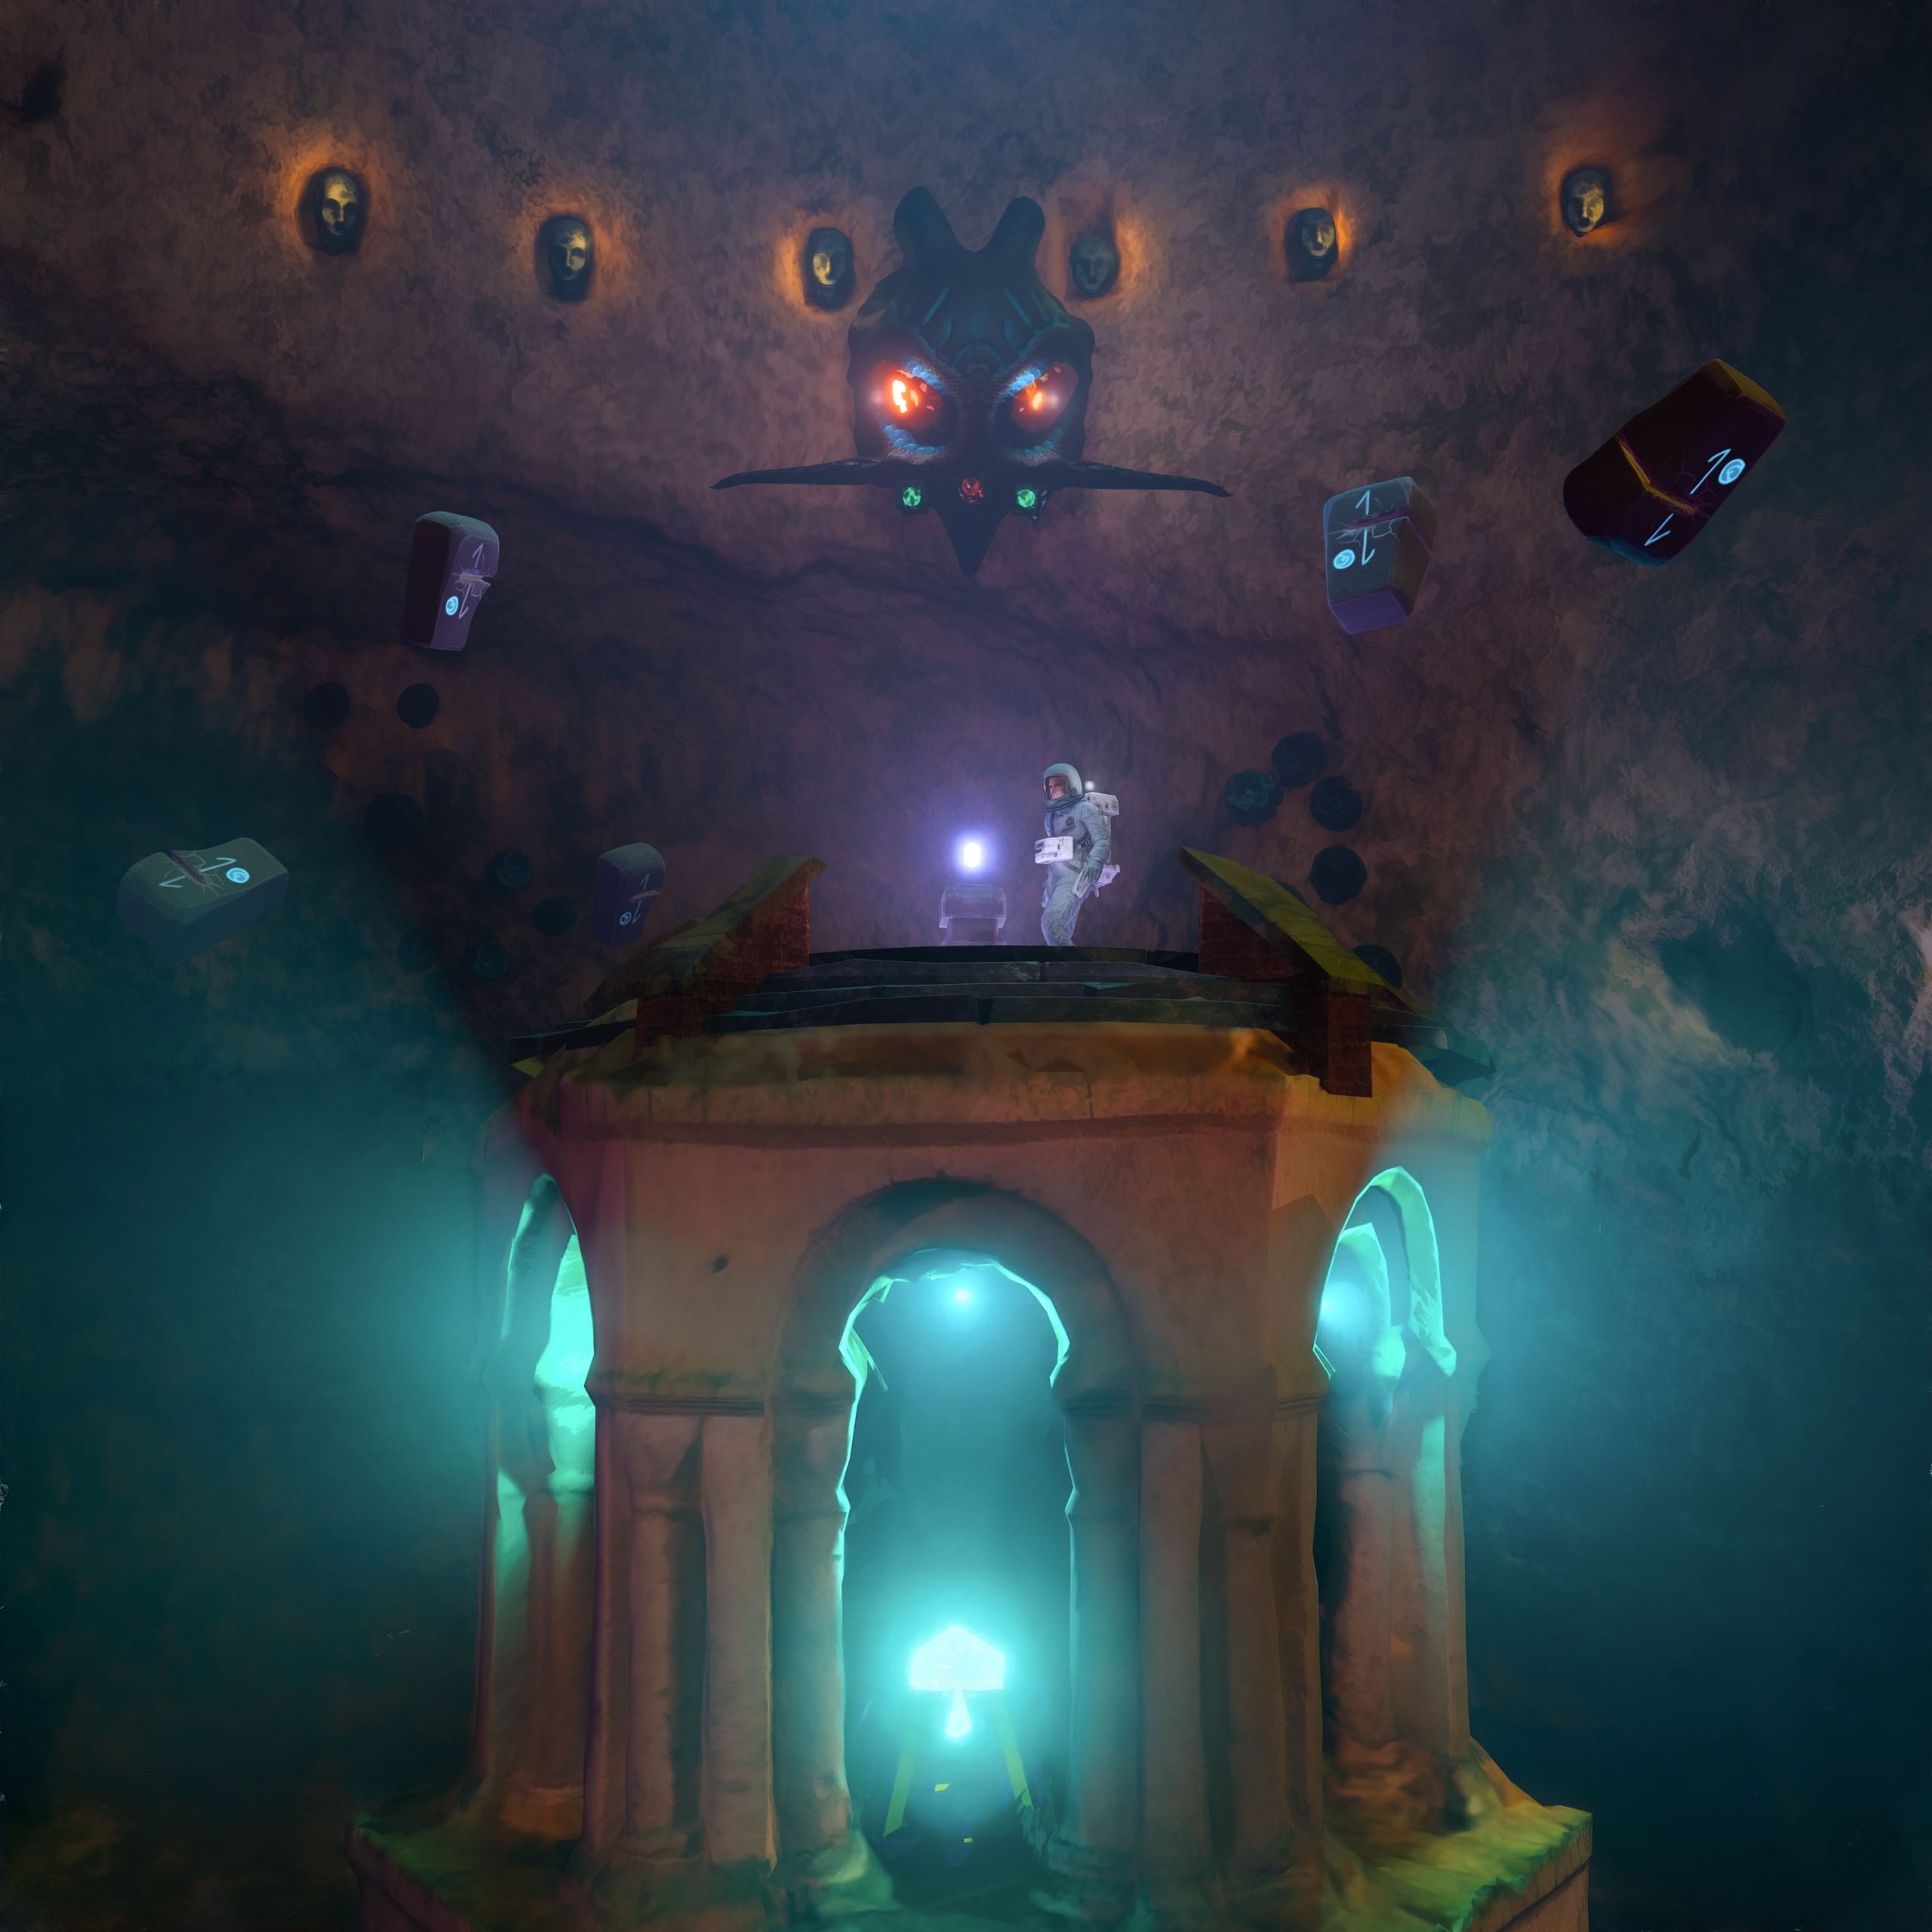 Ancient Artifact main scene, a huge alien cave, with floating stones around, and a tower emitting blue light, a man standing on top of the tower, staring at the shiny ancient artifact. 3D animations & artworks Created by Henrik Veres , Avian Brothers #henrikveres #avianbrothers